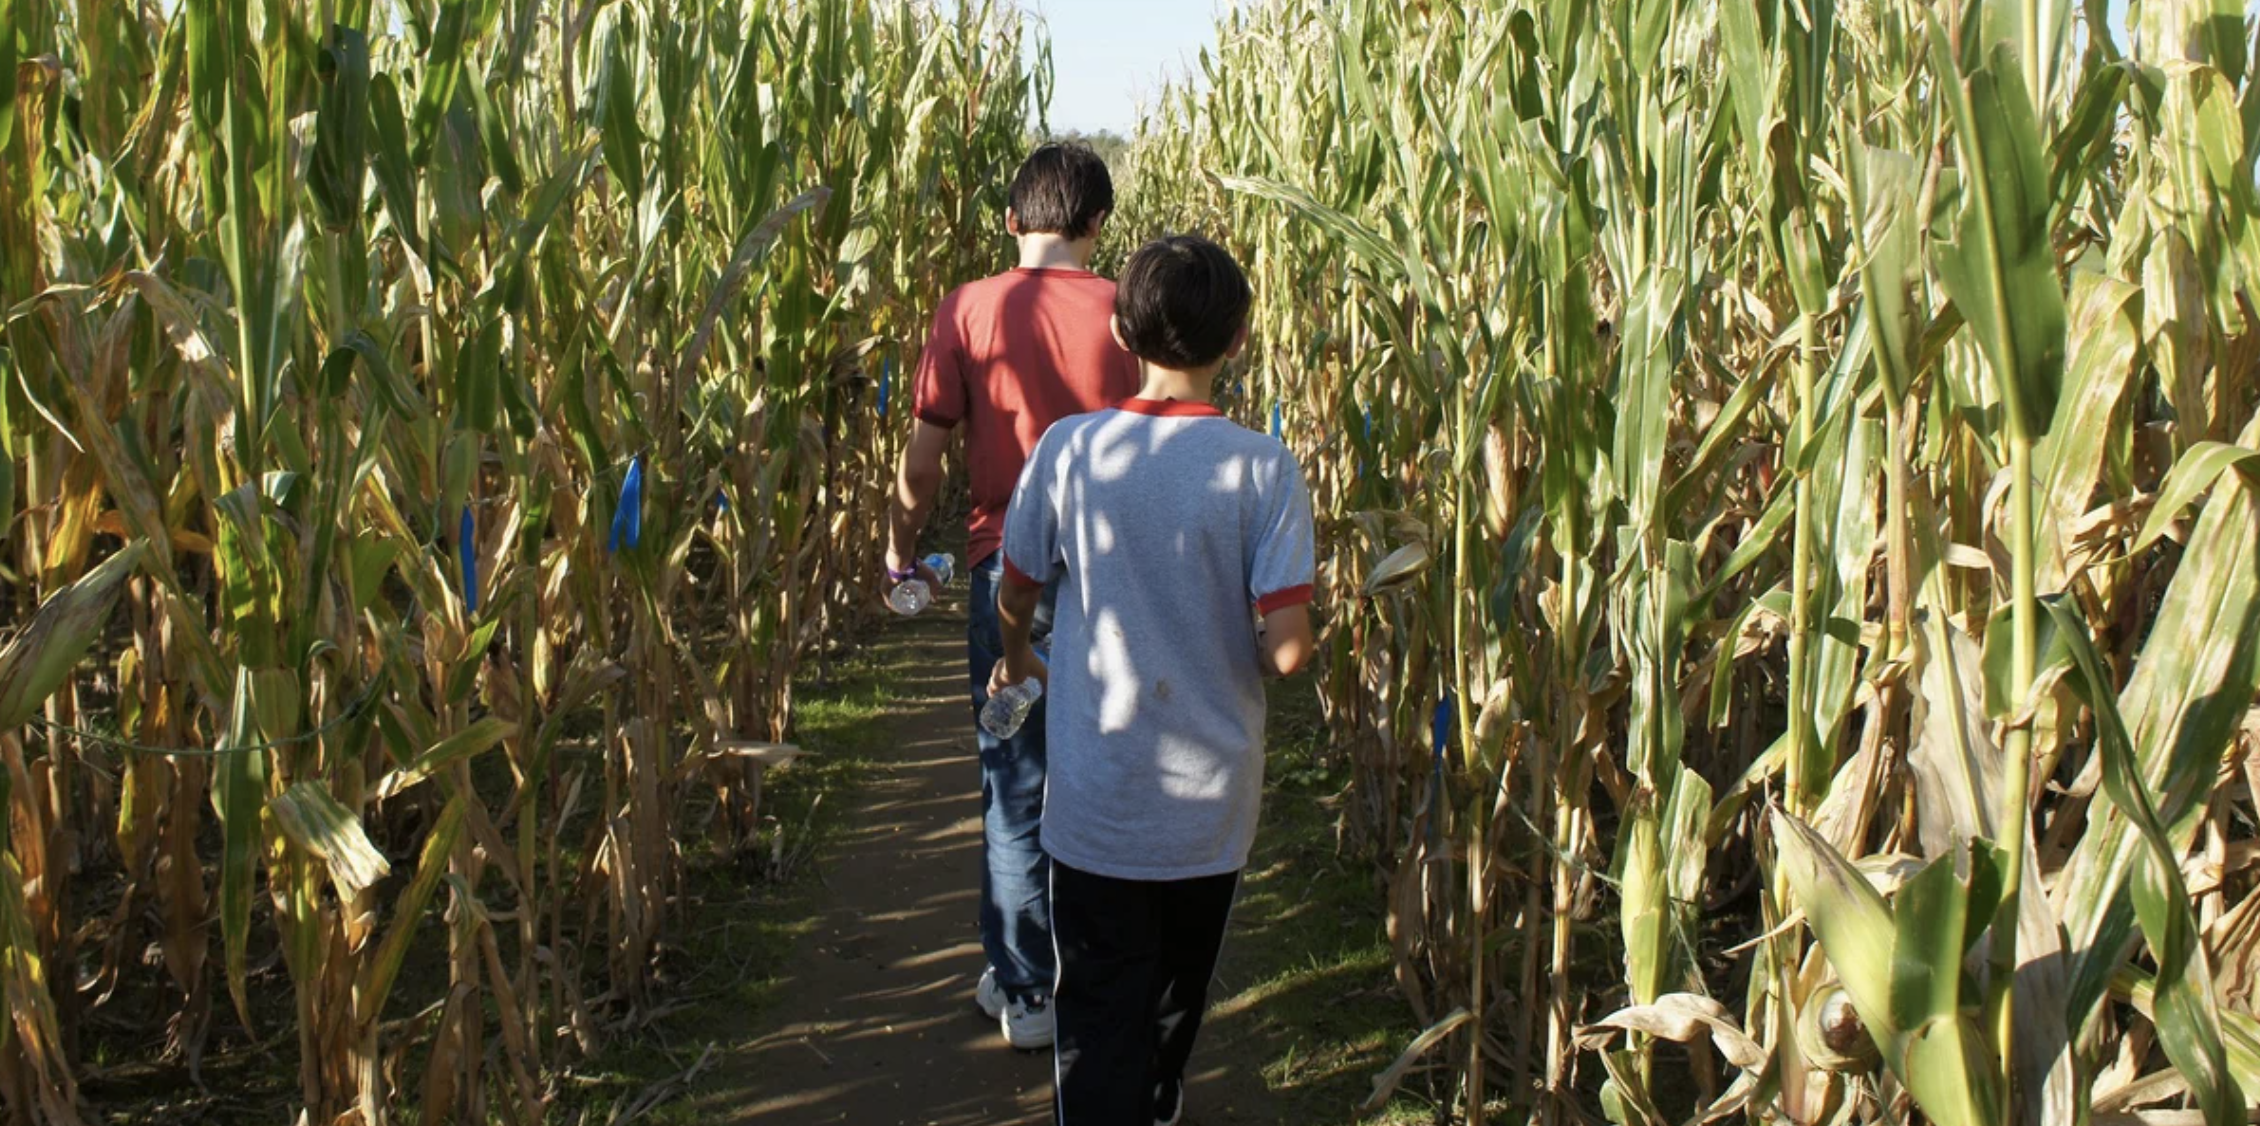 Two children walk through stalks of corn with their backs to the camera